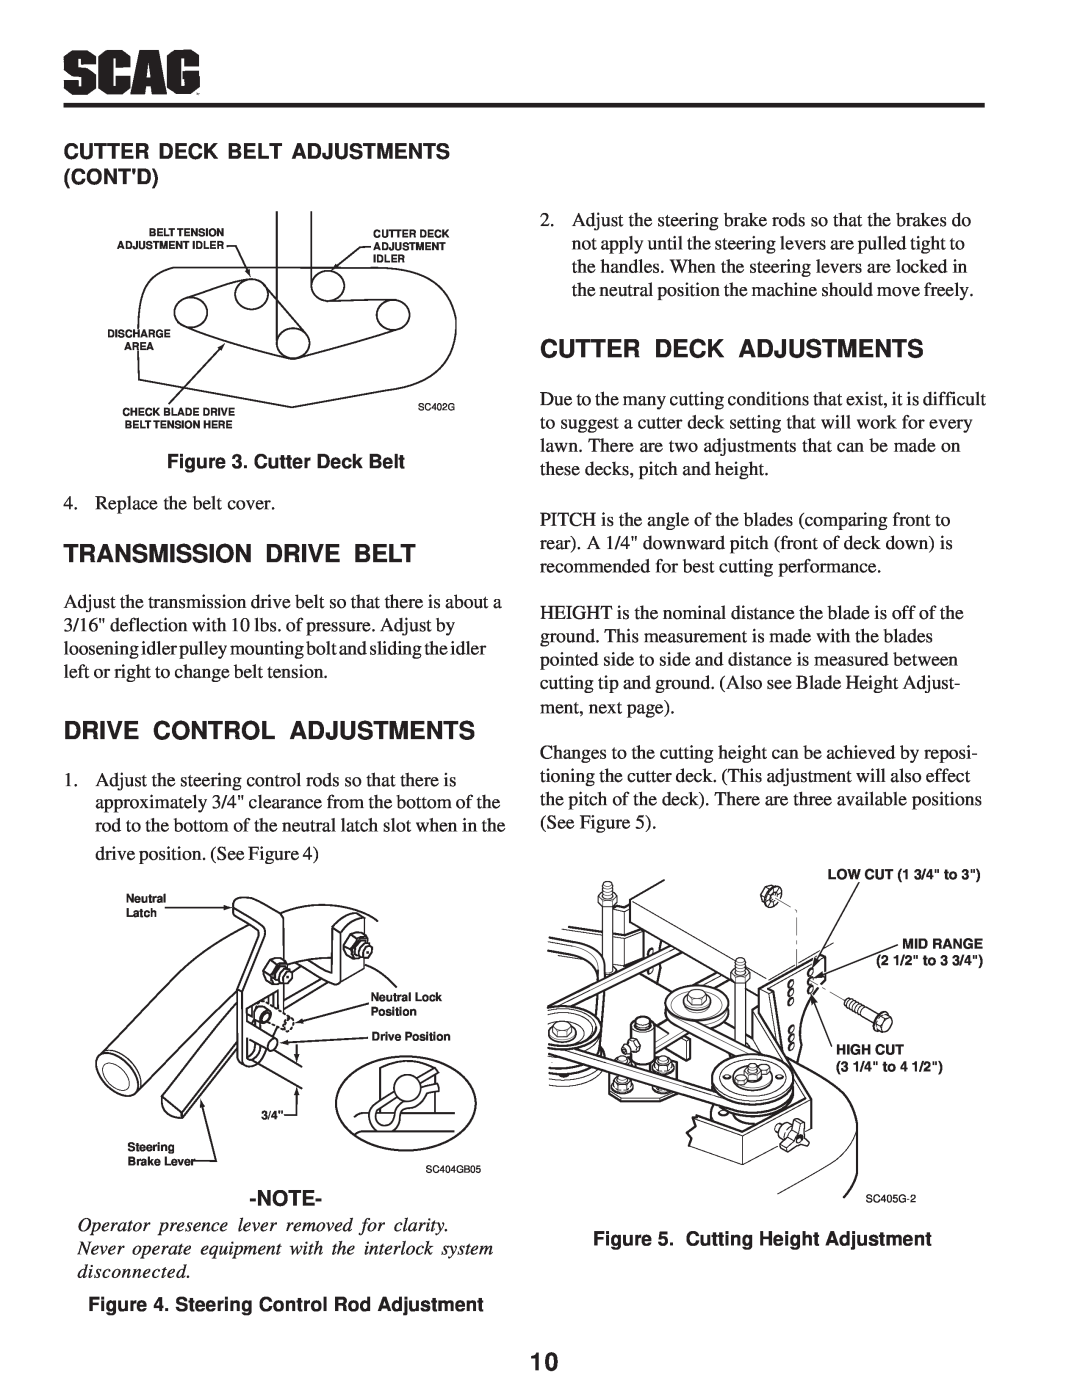 Scag Power Equipment SW manual Cutter Deck Belt Adjustments Contd, Operator presence lever removed for clarity 